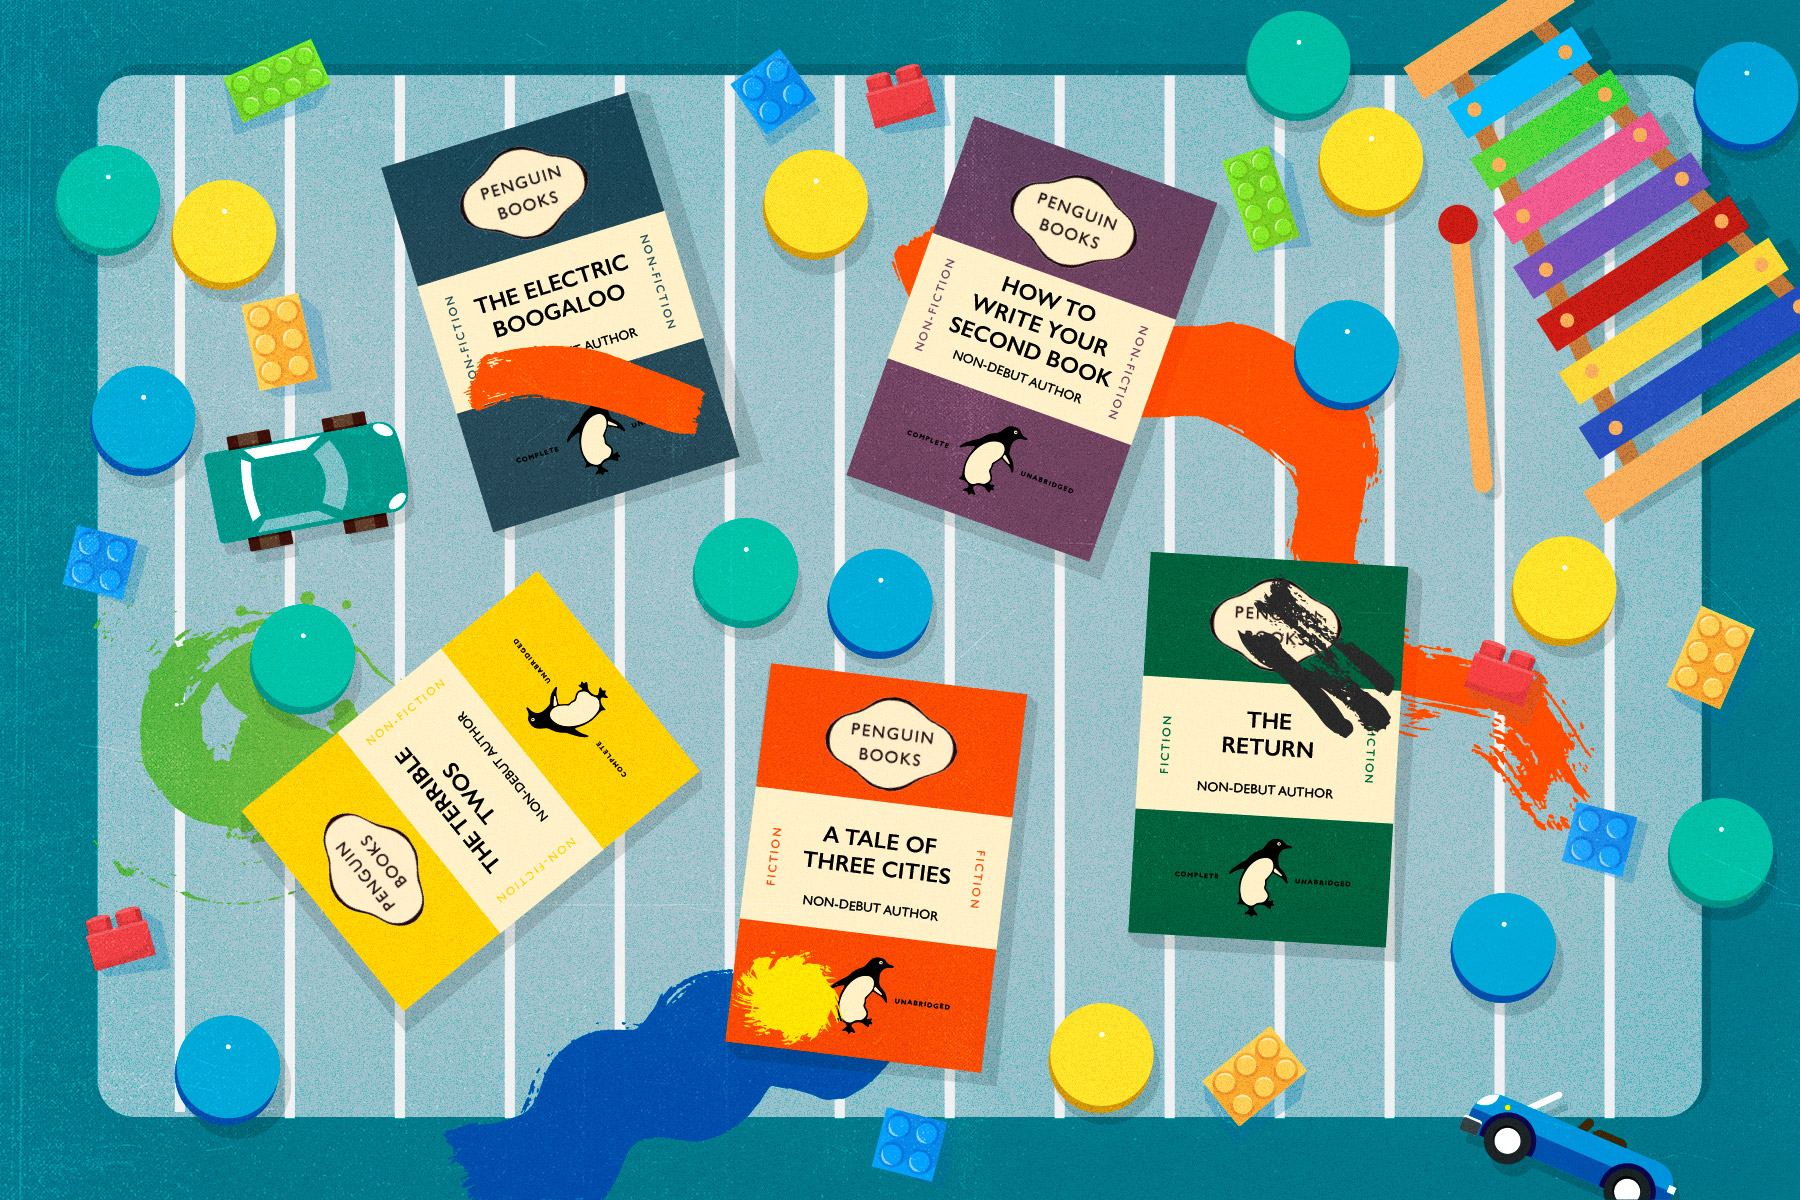 An illustration of Penguin books on a playmat with toys